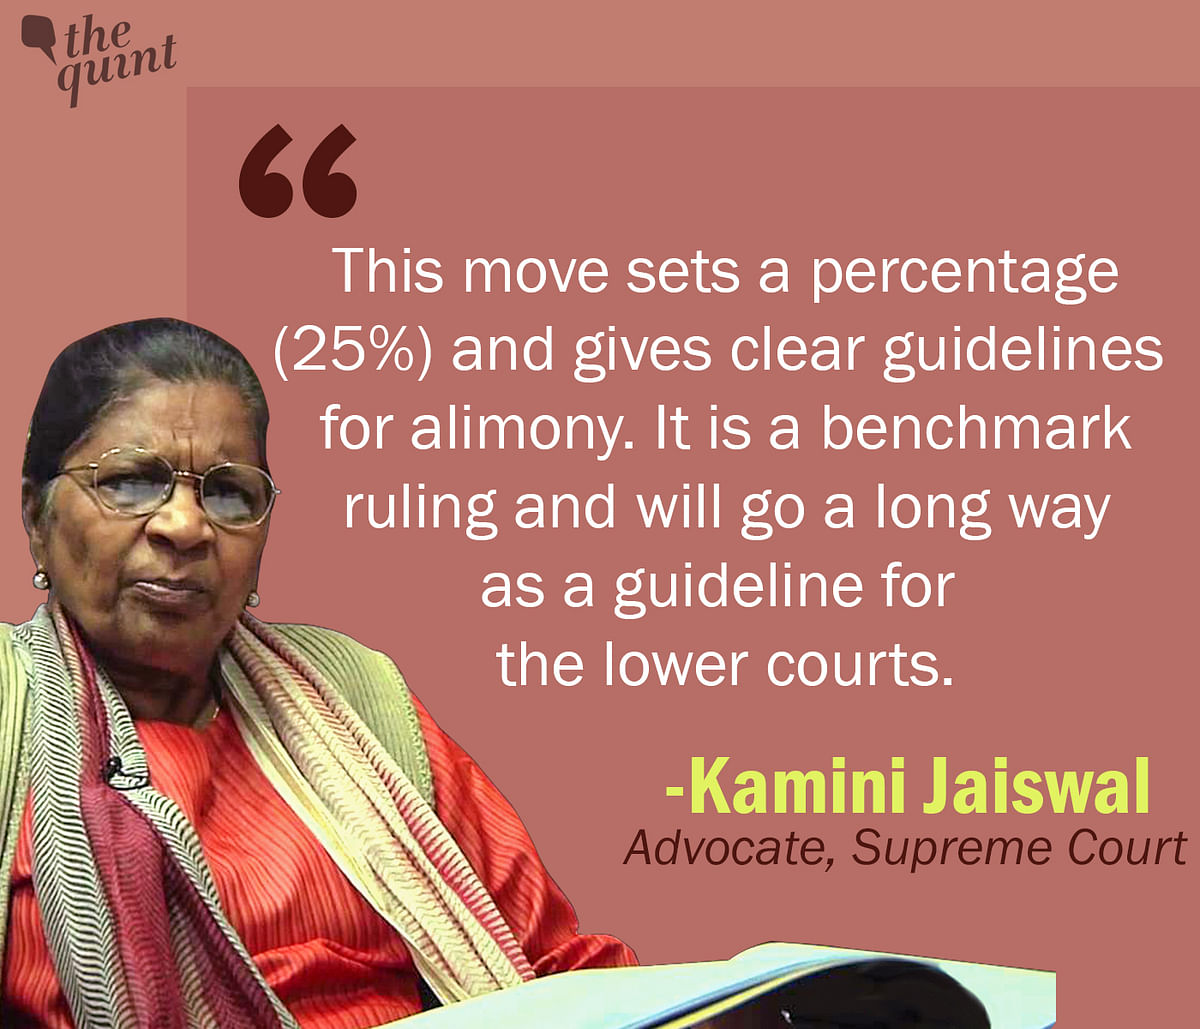 

We spoke to SC advocate Kamini Jaiswal on what the SC ruling means and here is what she had to say.